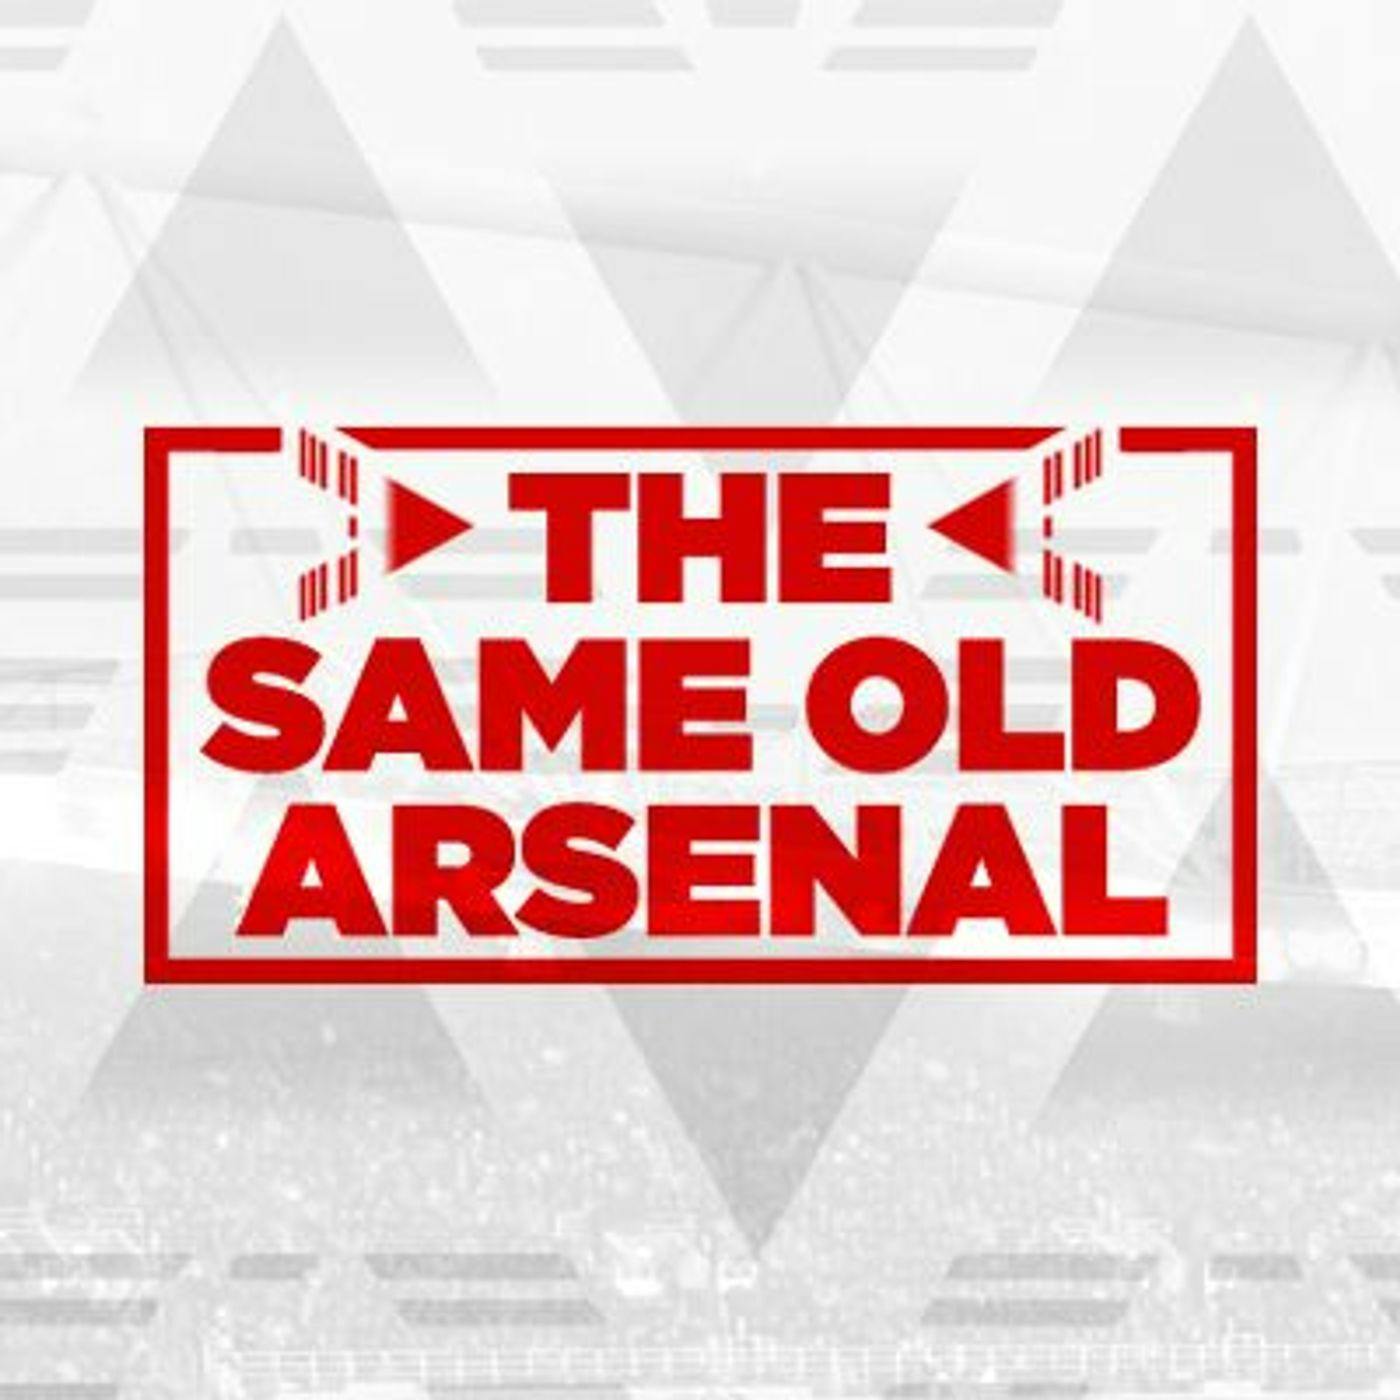 Arsenal 3 - 0 Newcastle Utd | Second Half Master Class | The Same Old Arsenal Podcast